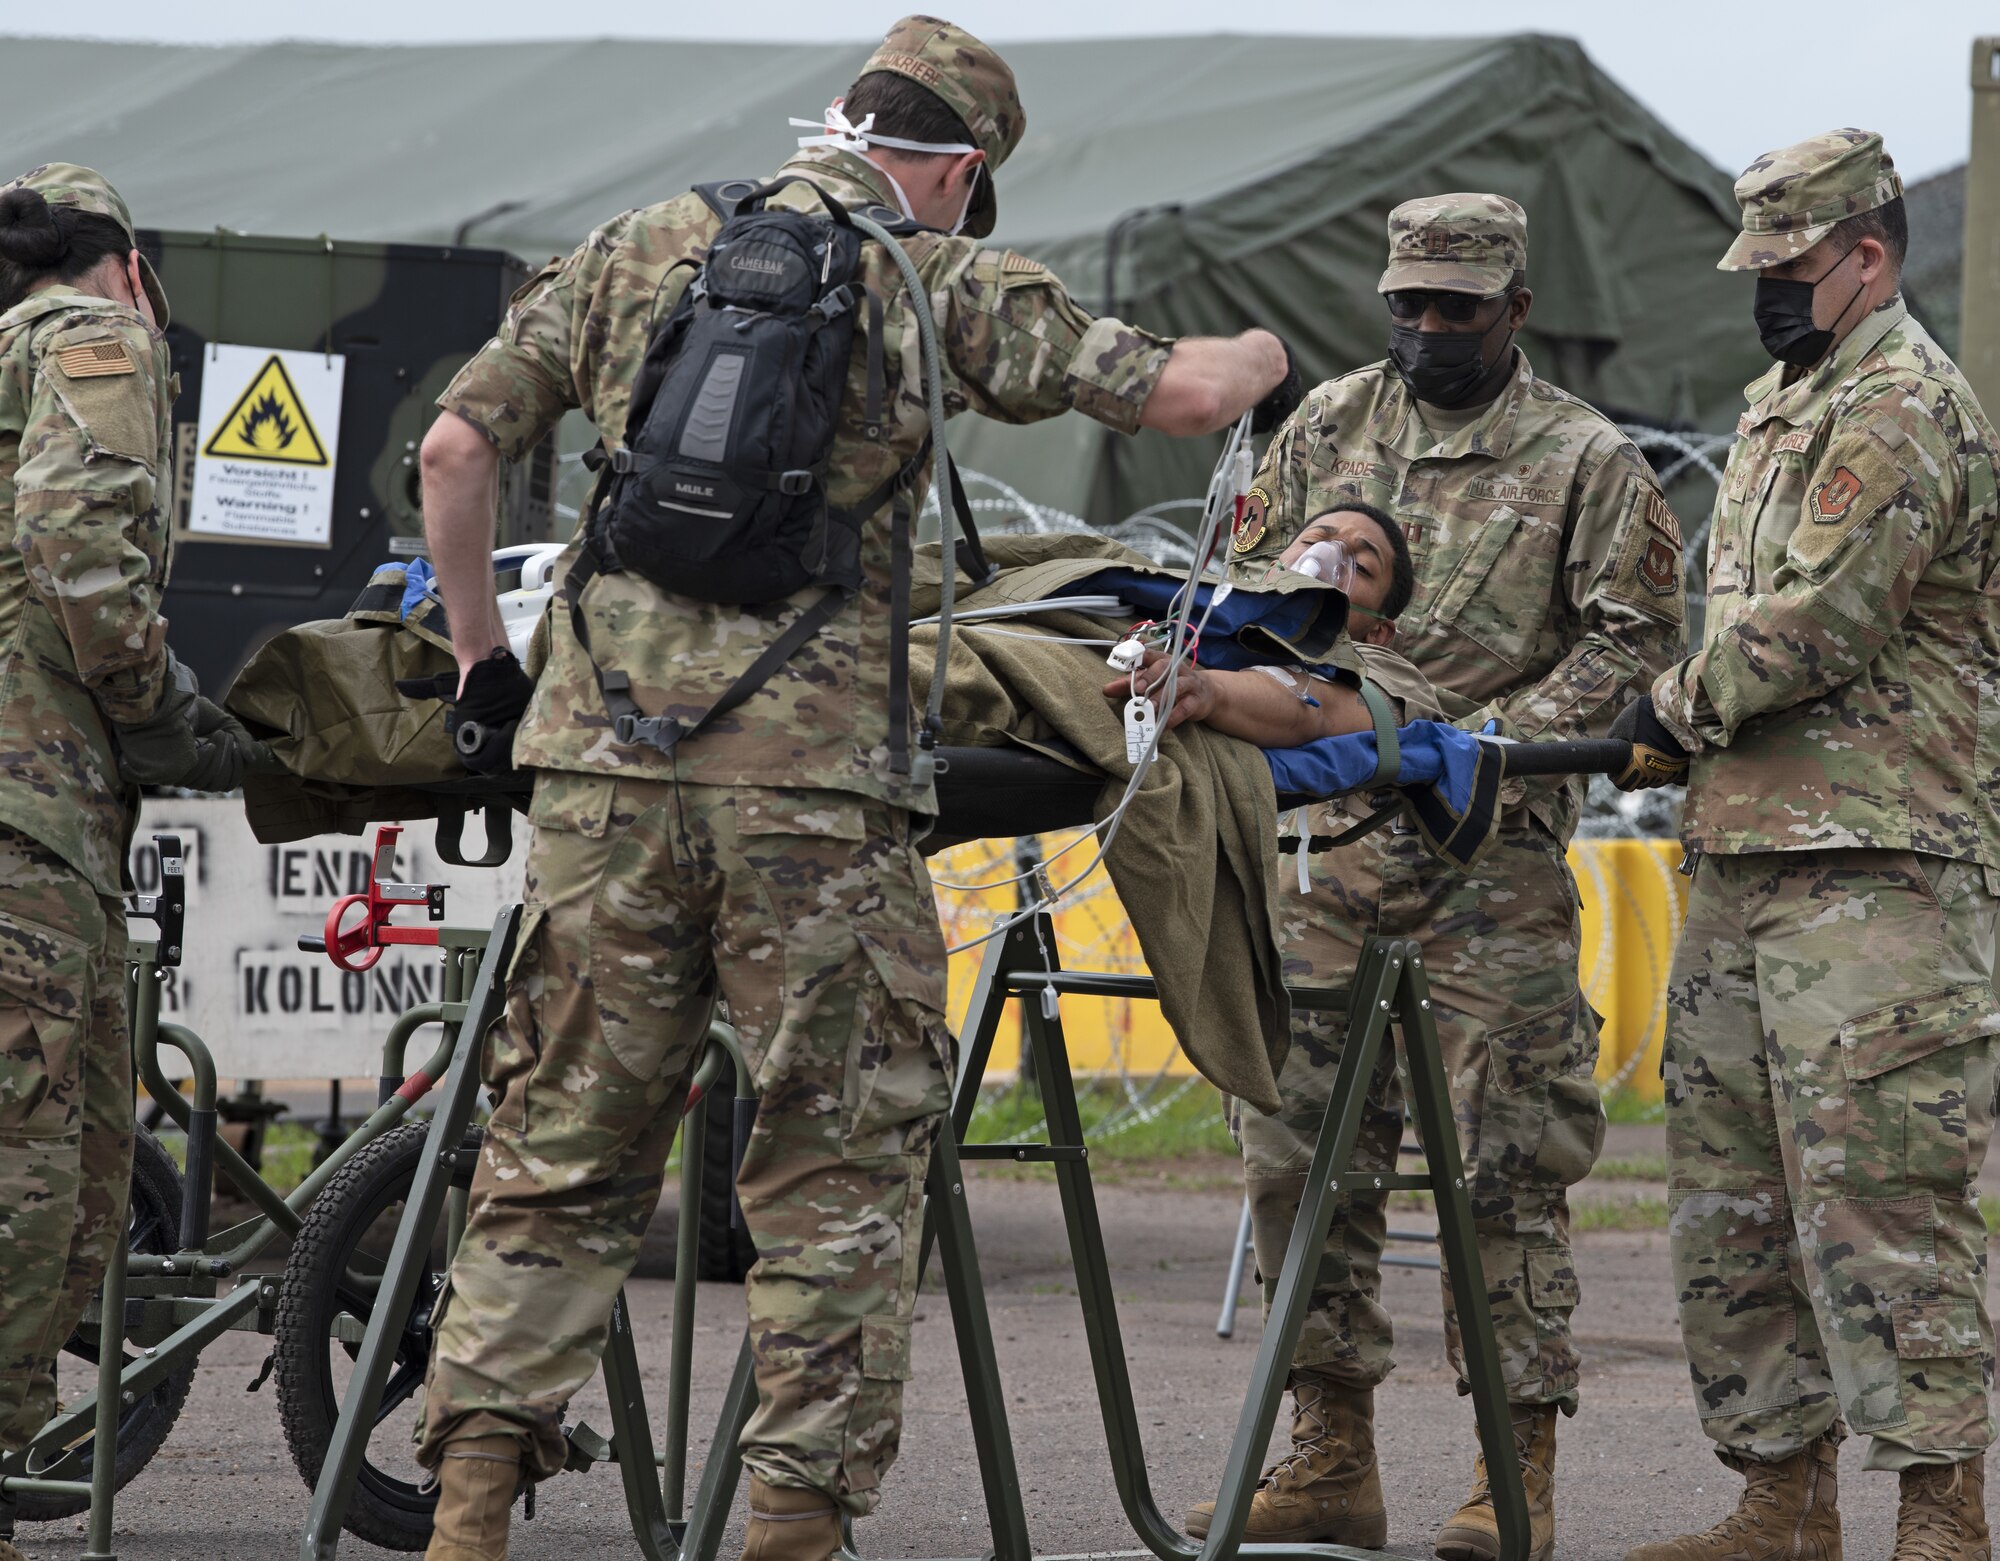 52nd Medical Group Airmen attend to a simulated casualty during Saber Guardian 21 at Baumholder, Germany, June 3, 2021. The Airmen supported the exercise by providing rapid response en-route patient staging for Aeromedical Evacuation in support of contingency operations. (U.S. Air Force photo by Tech. Sgt. Tony Plyler)